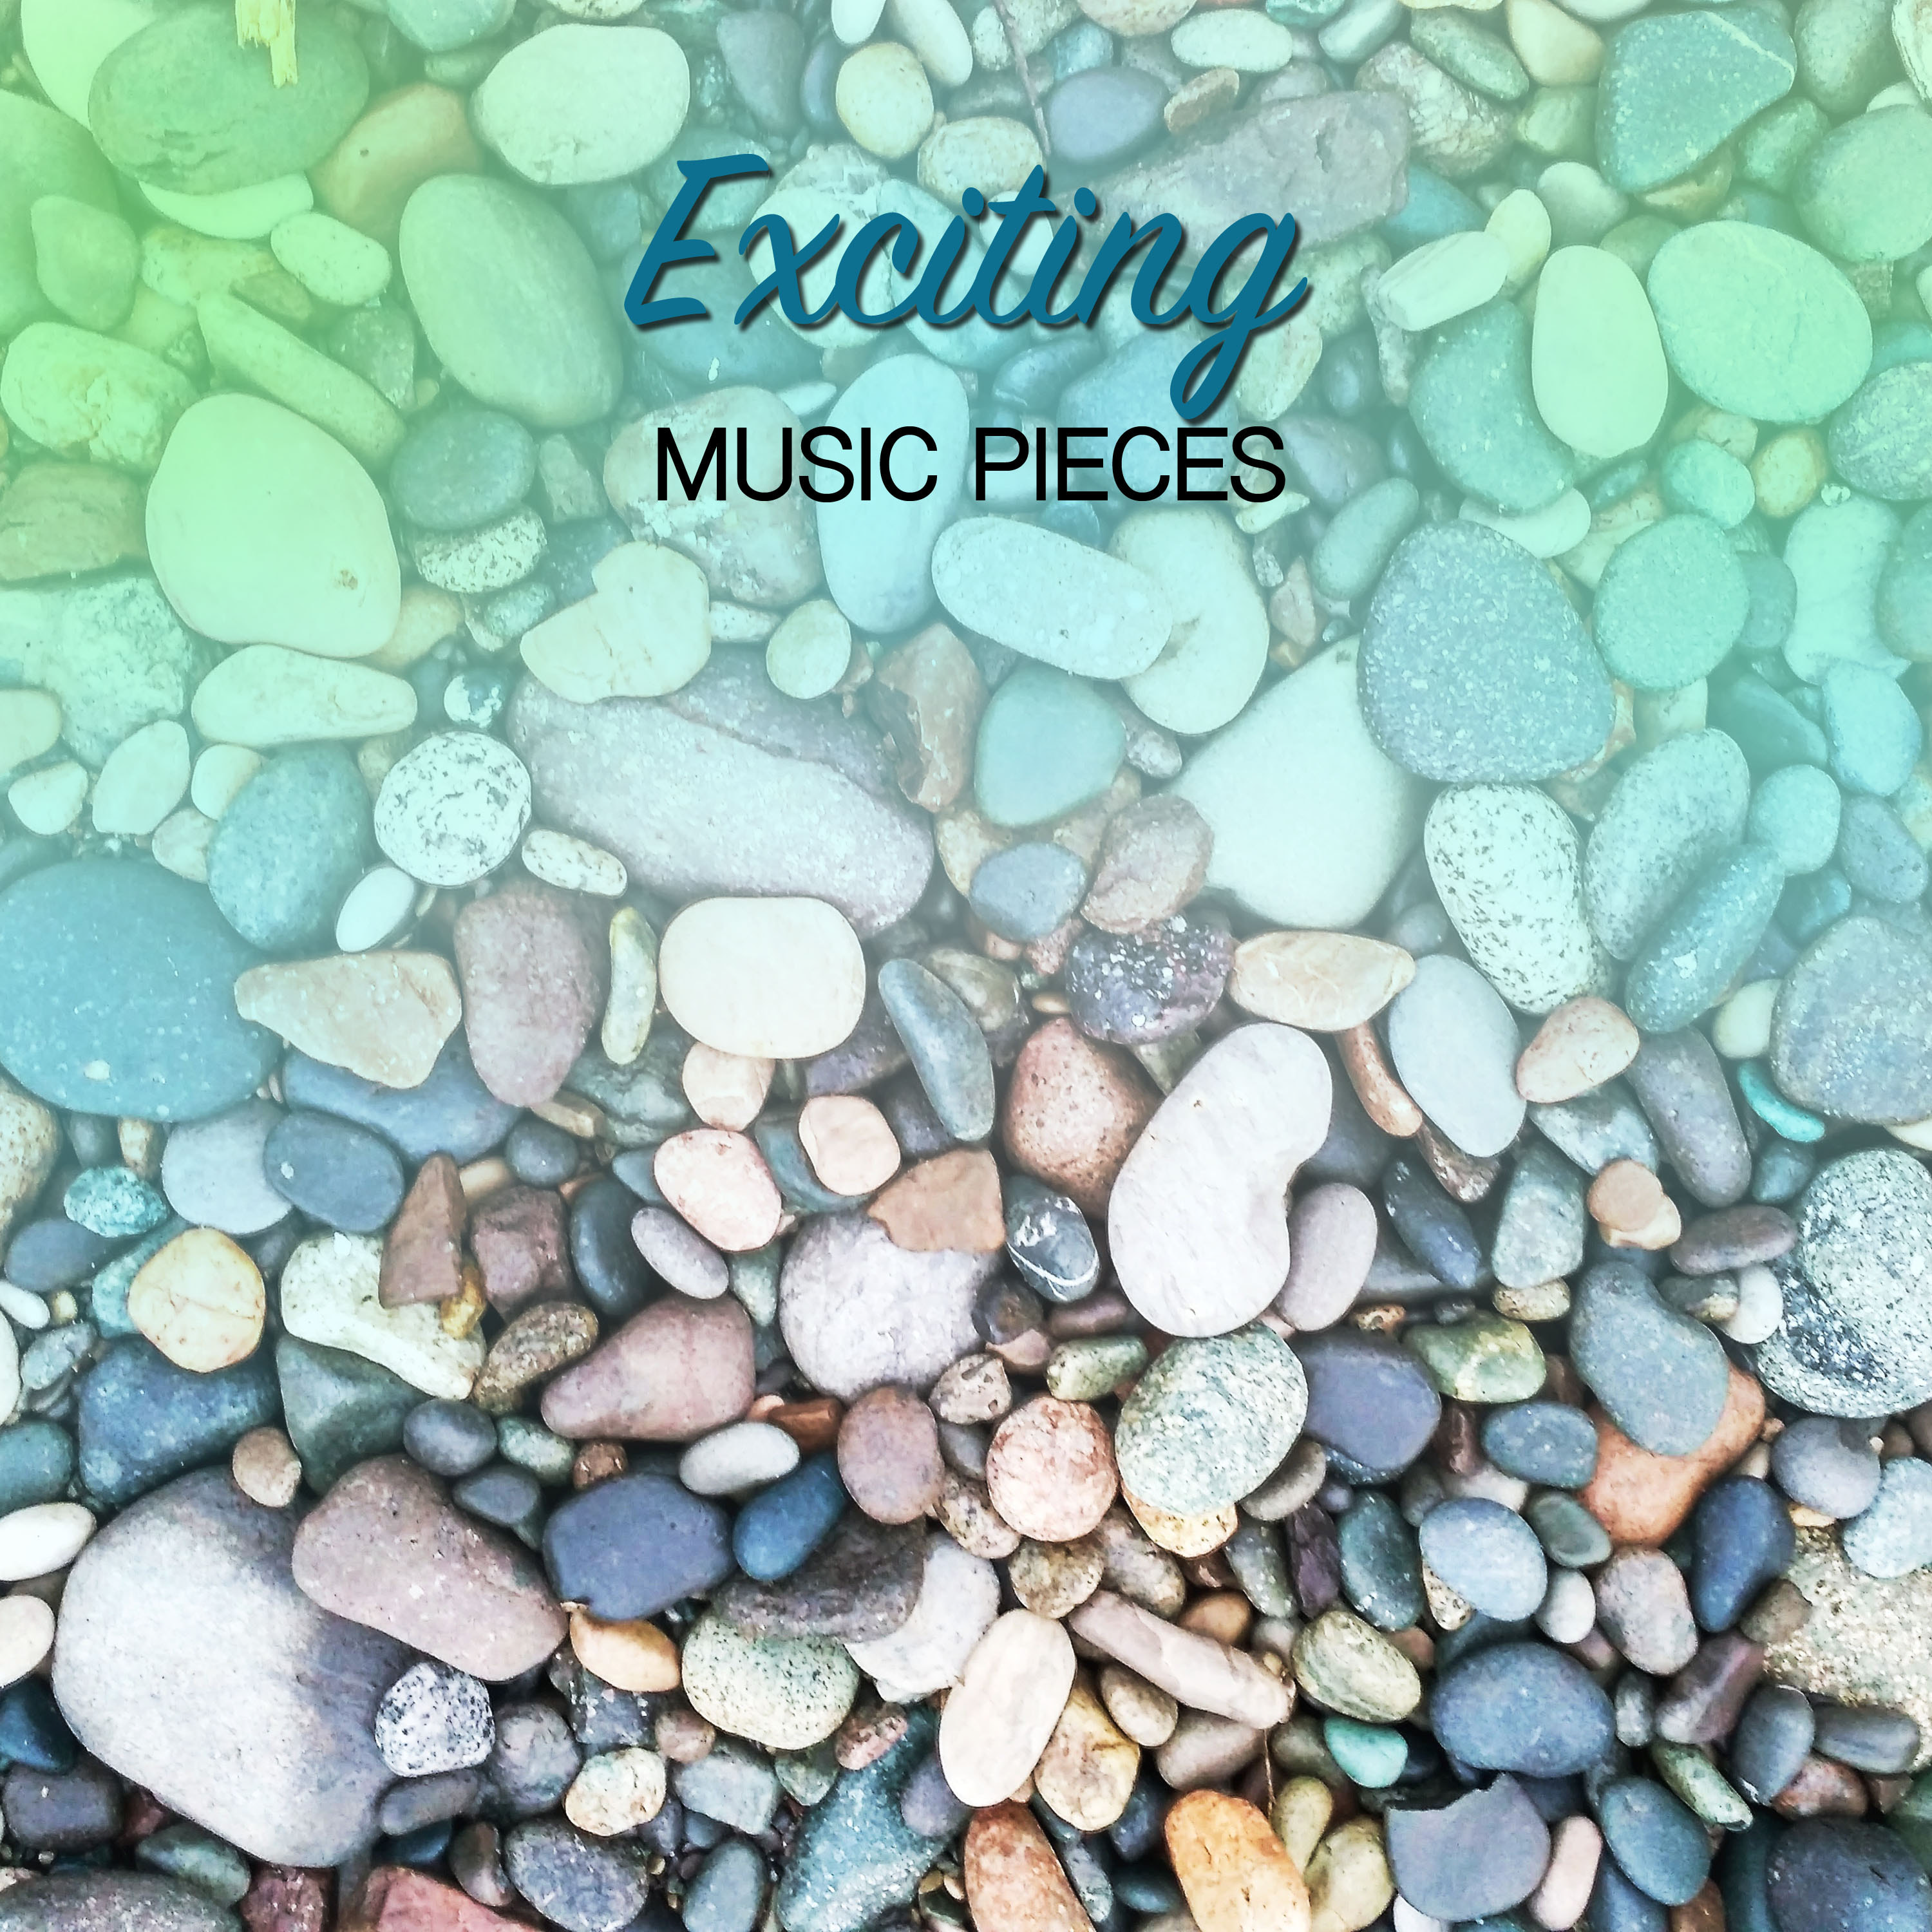 #2018 Exciting Music Pieces to Aid Relaxation & Massage